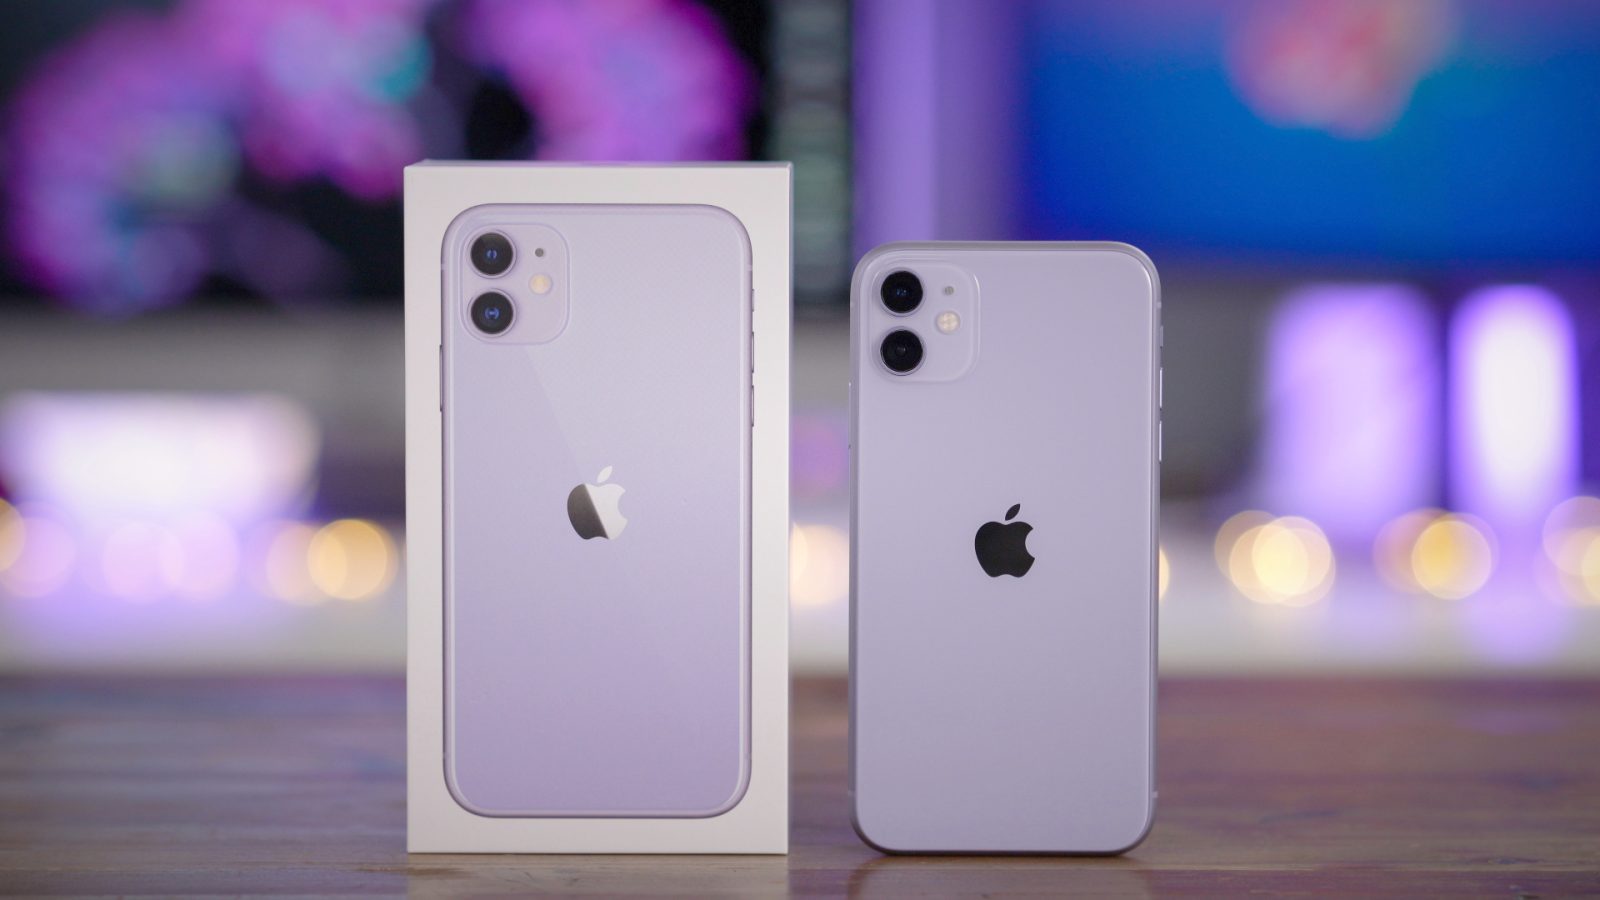 Top Iphone 11 Features An Even Better Bang For The Buck Video